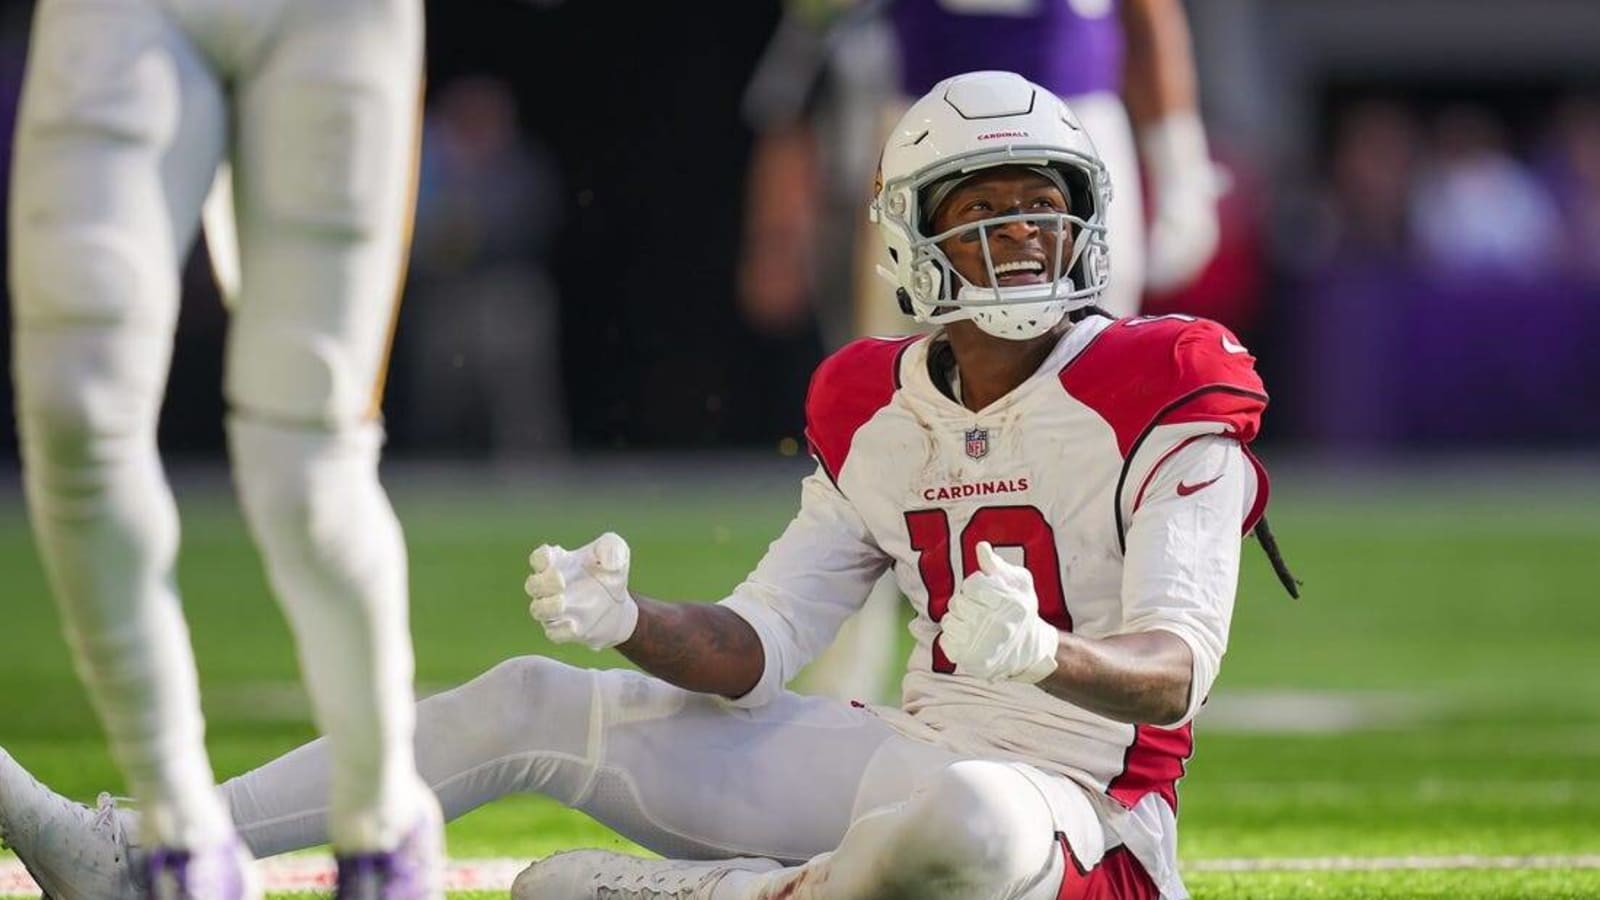 Seattle Seahawks vs. Arizona Cardinals prediction, pick, odds: Cards know they need to make a move